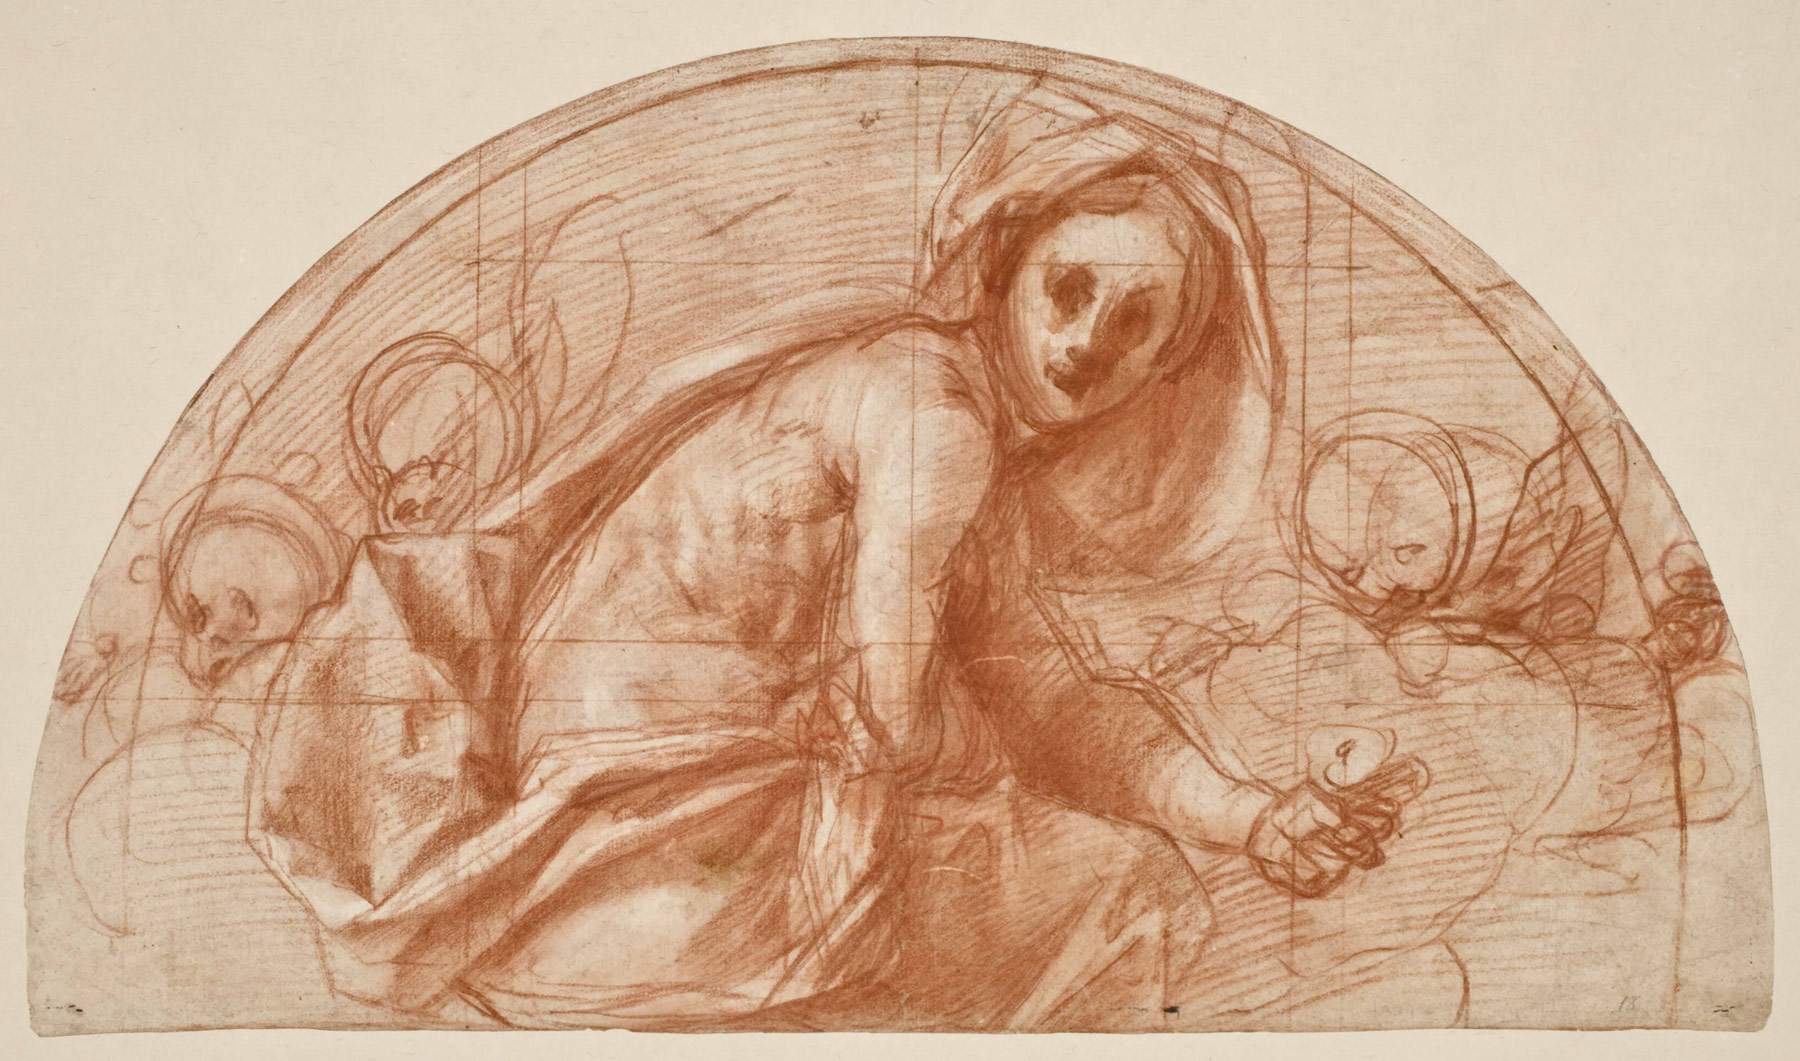 In Rome exhibition of unpublished drawings by Pontormo at the Istituto Centrale per la Grafica